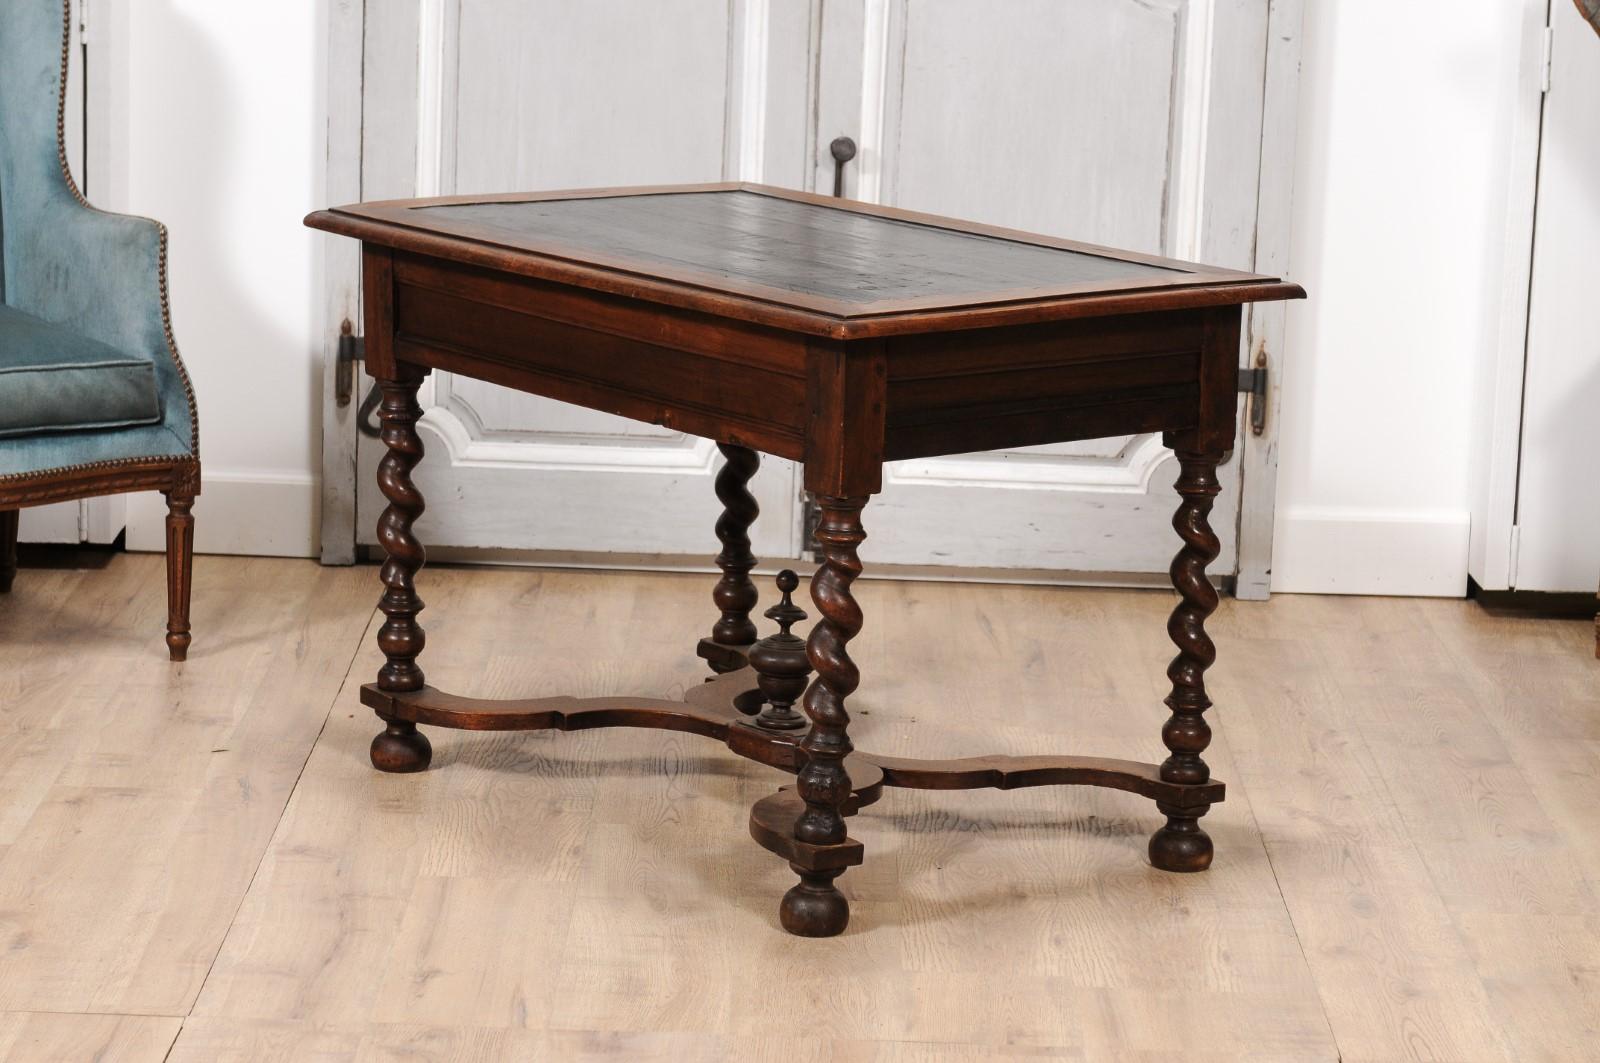 Louis XIII Period 1630s Carved Walnut Barley Twist Table with Black Painted Top In Good Condition For Sale In Atlanta, GA